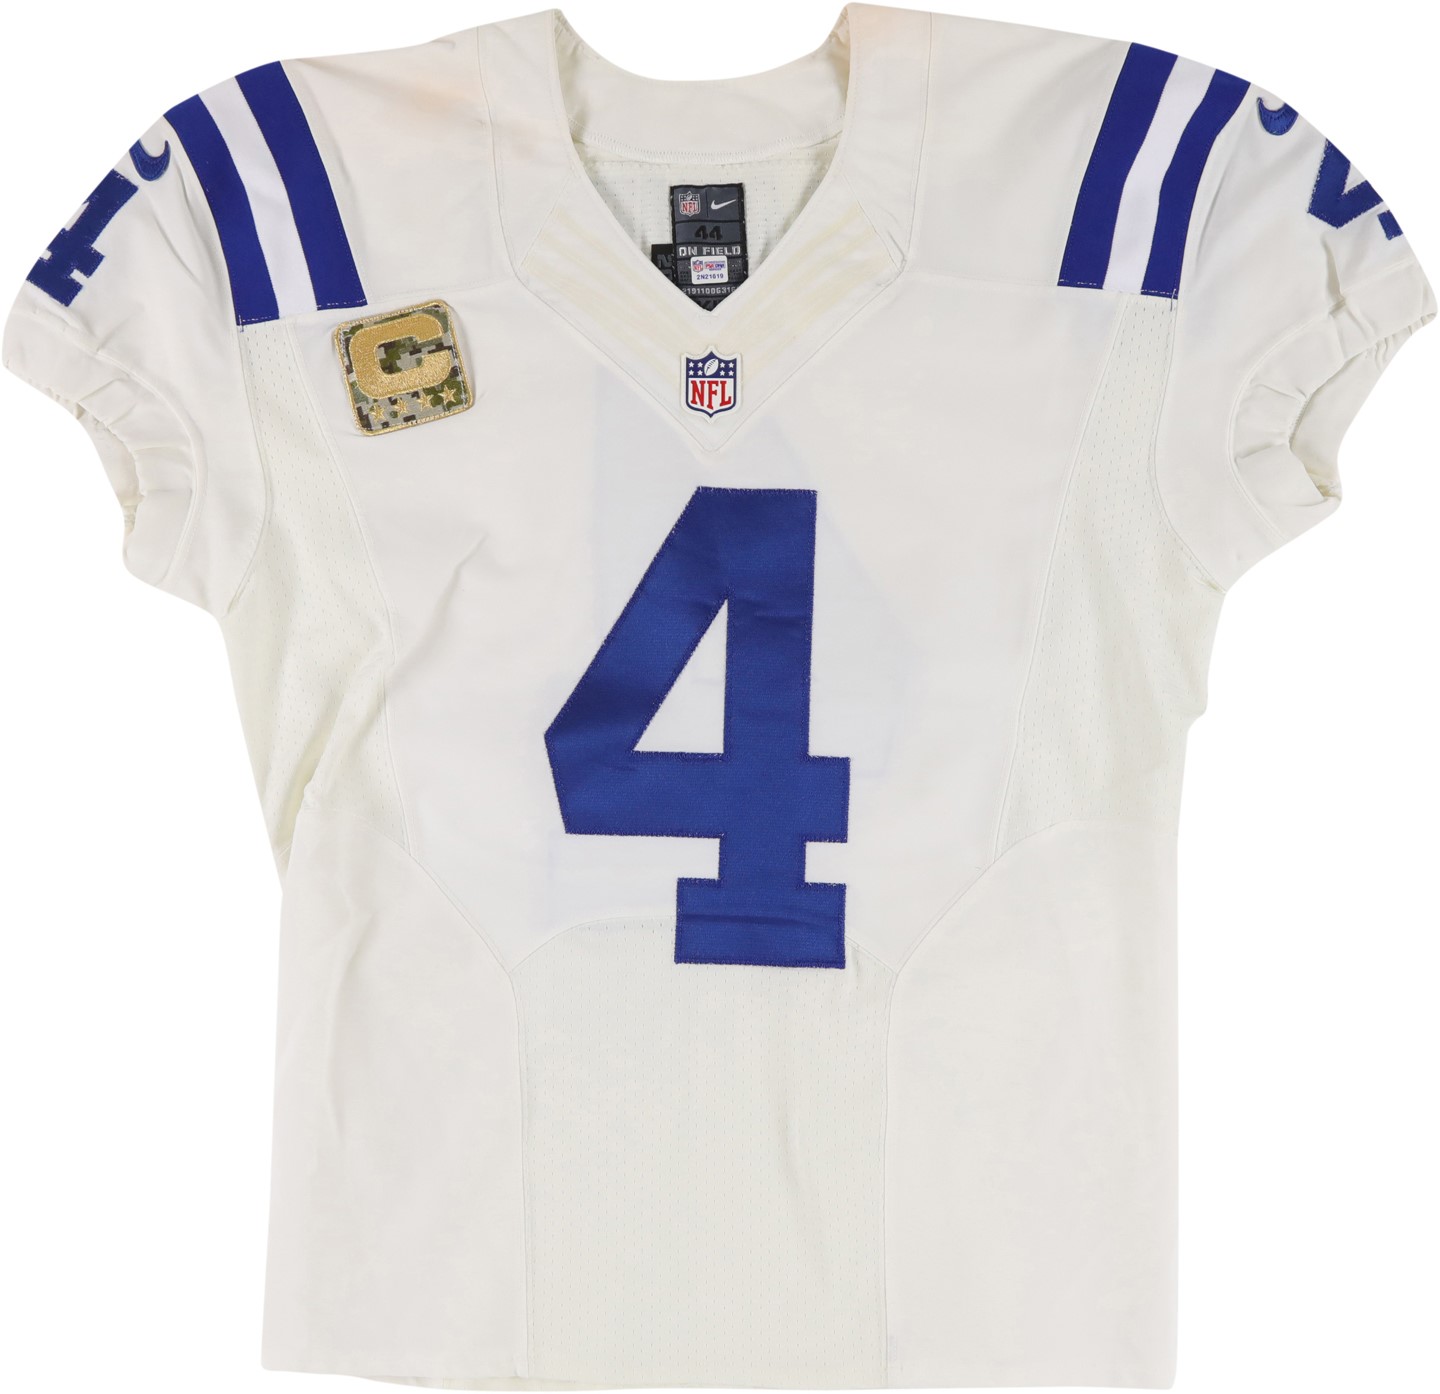 - 11/22/15 Adam Vinatieri "Salute to Service" Indianapolis Colts Game Worn Jersey (Photo-Matched & NFL PSA)